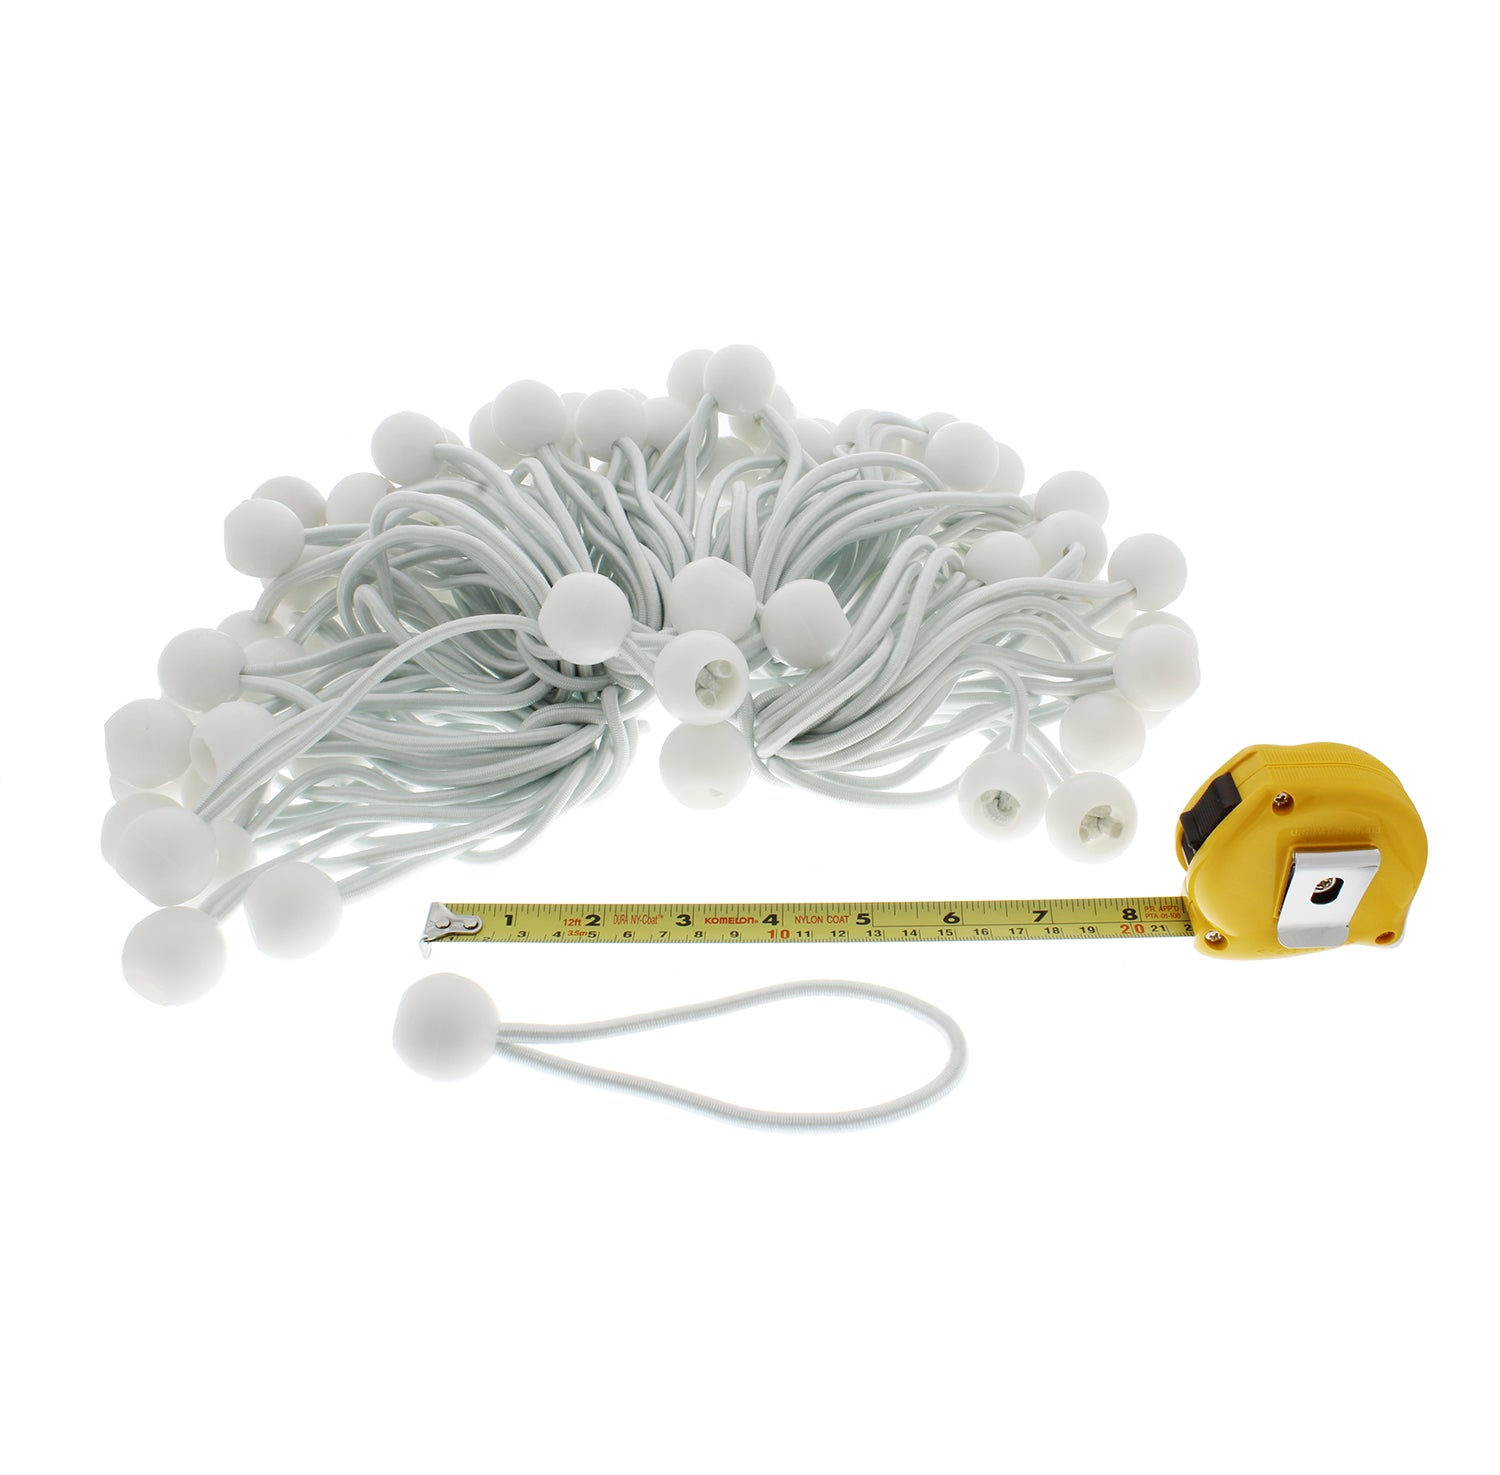 Ball Bungee Cord – 6” Inch White Bungee Cords with Balls, 100 Pack